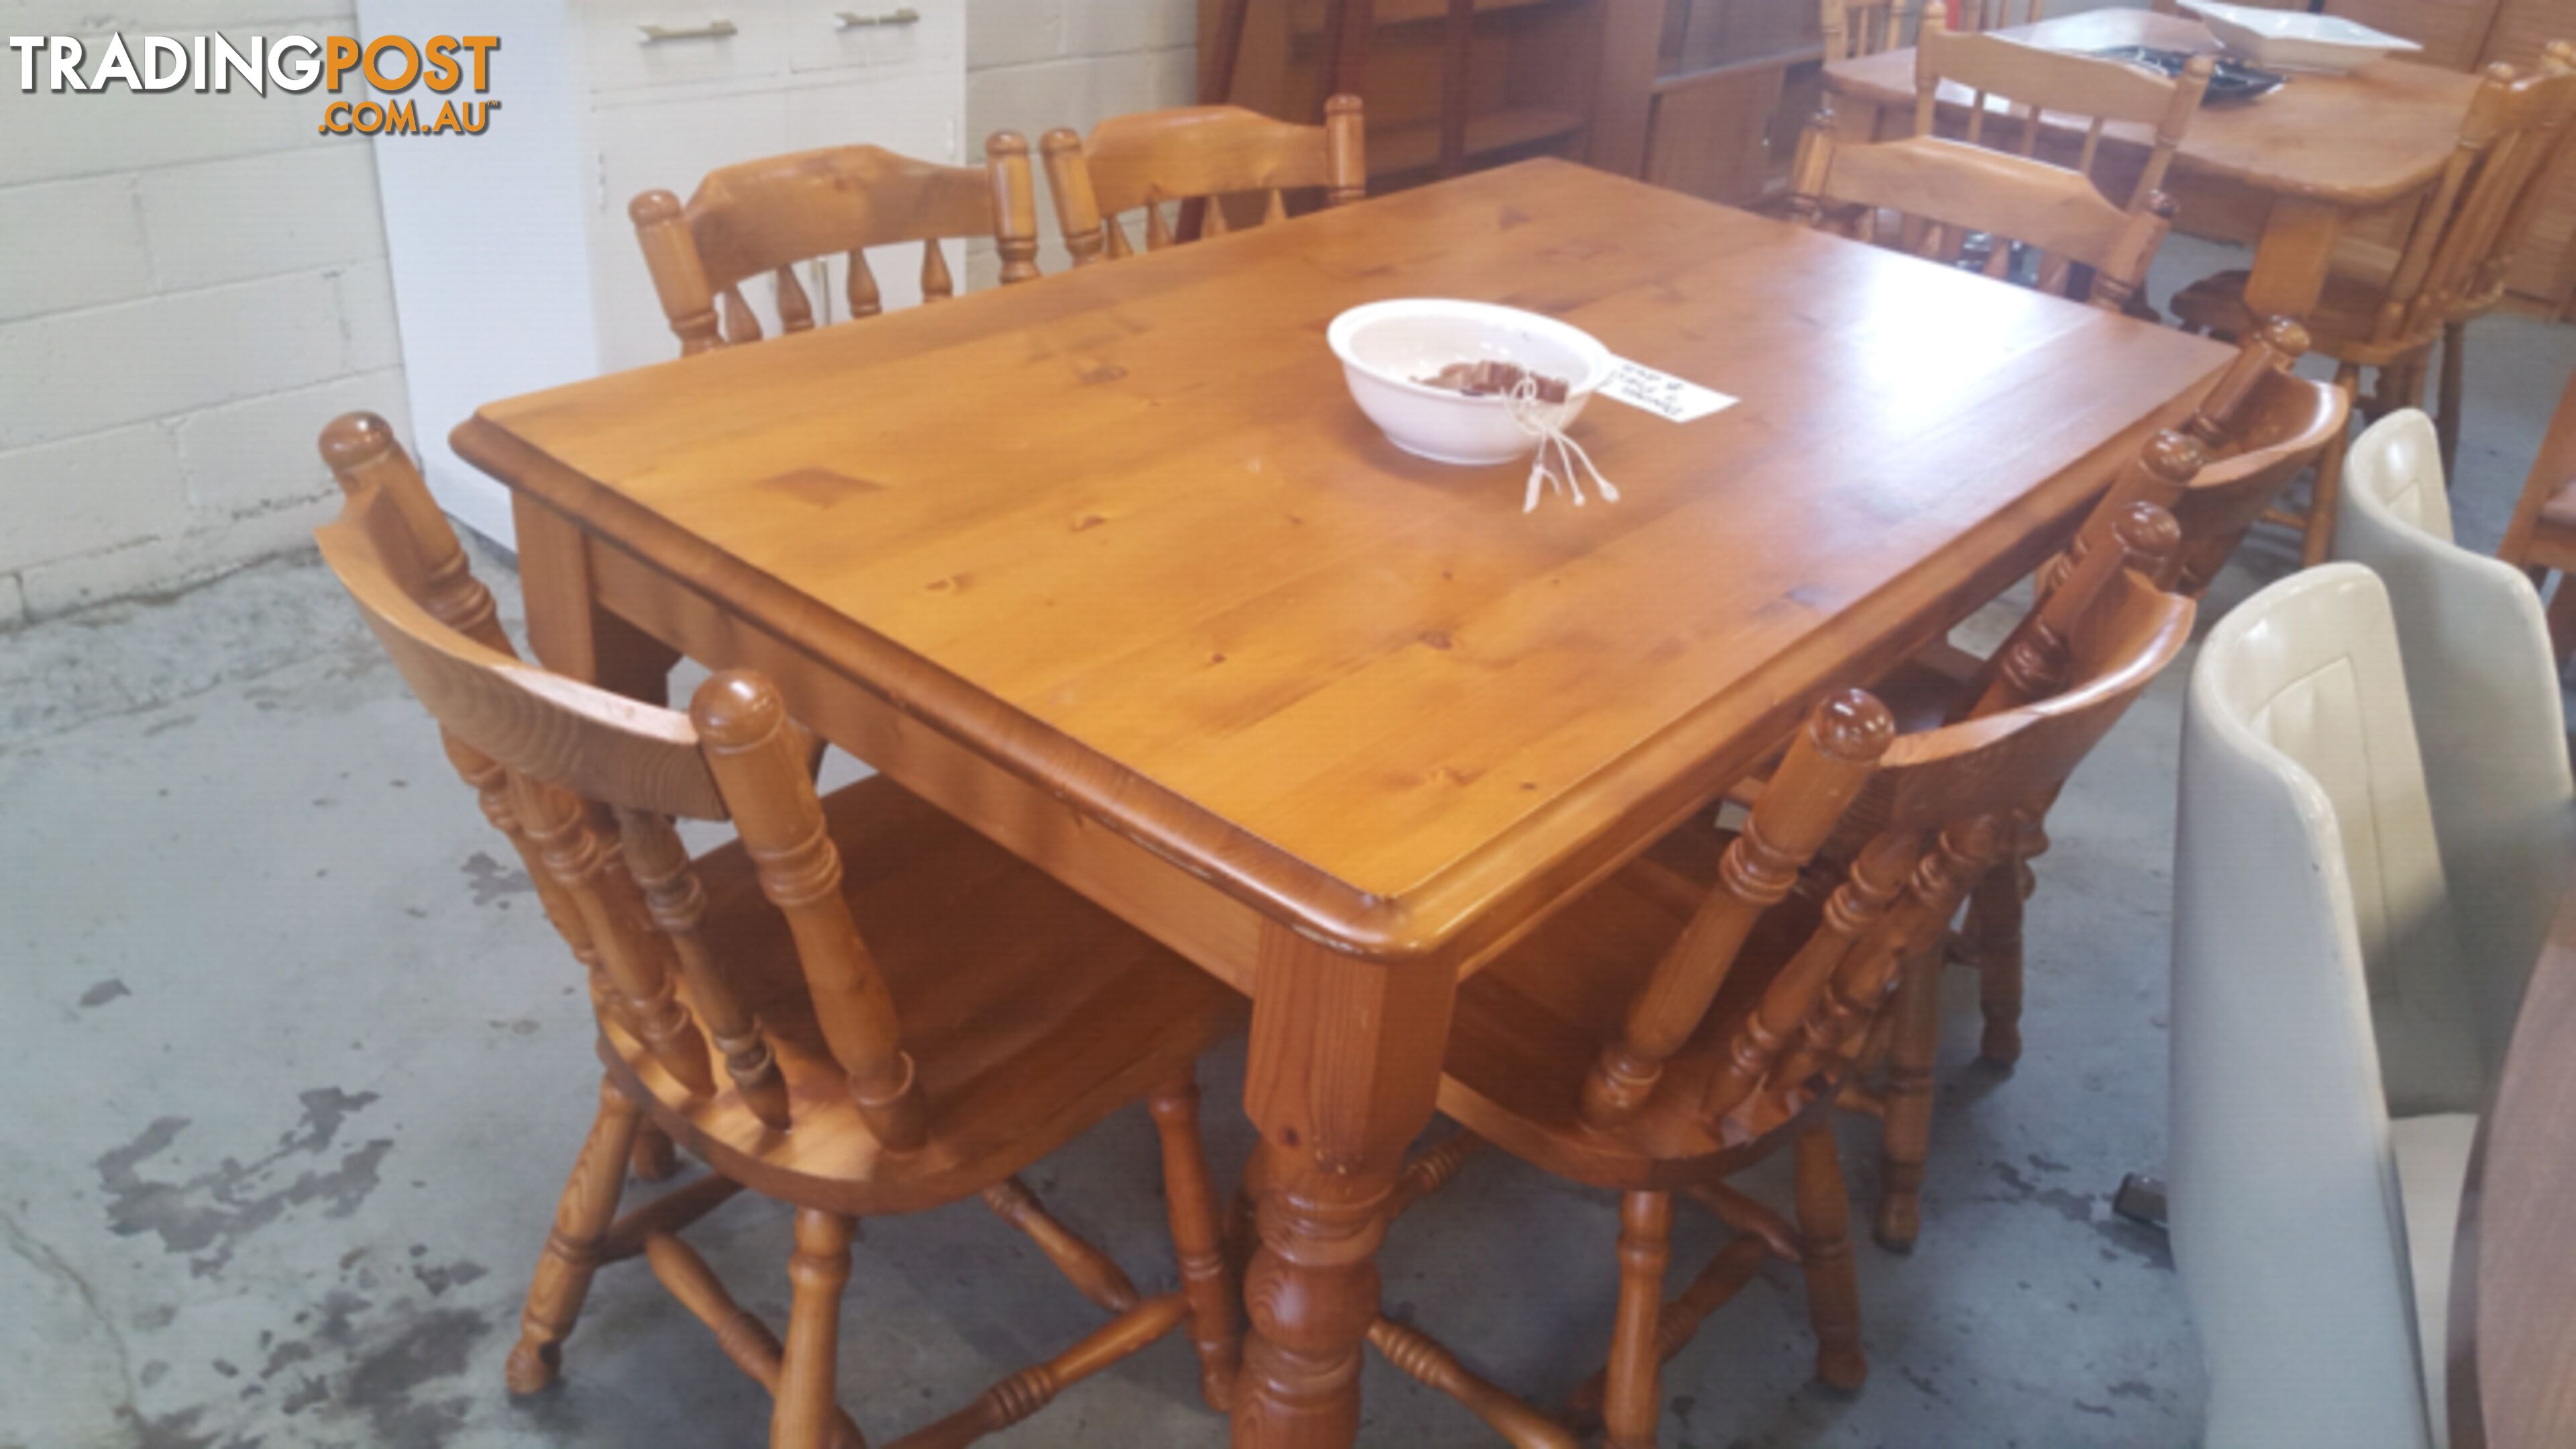 DINING SUITES FOR SALE